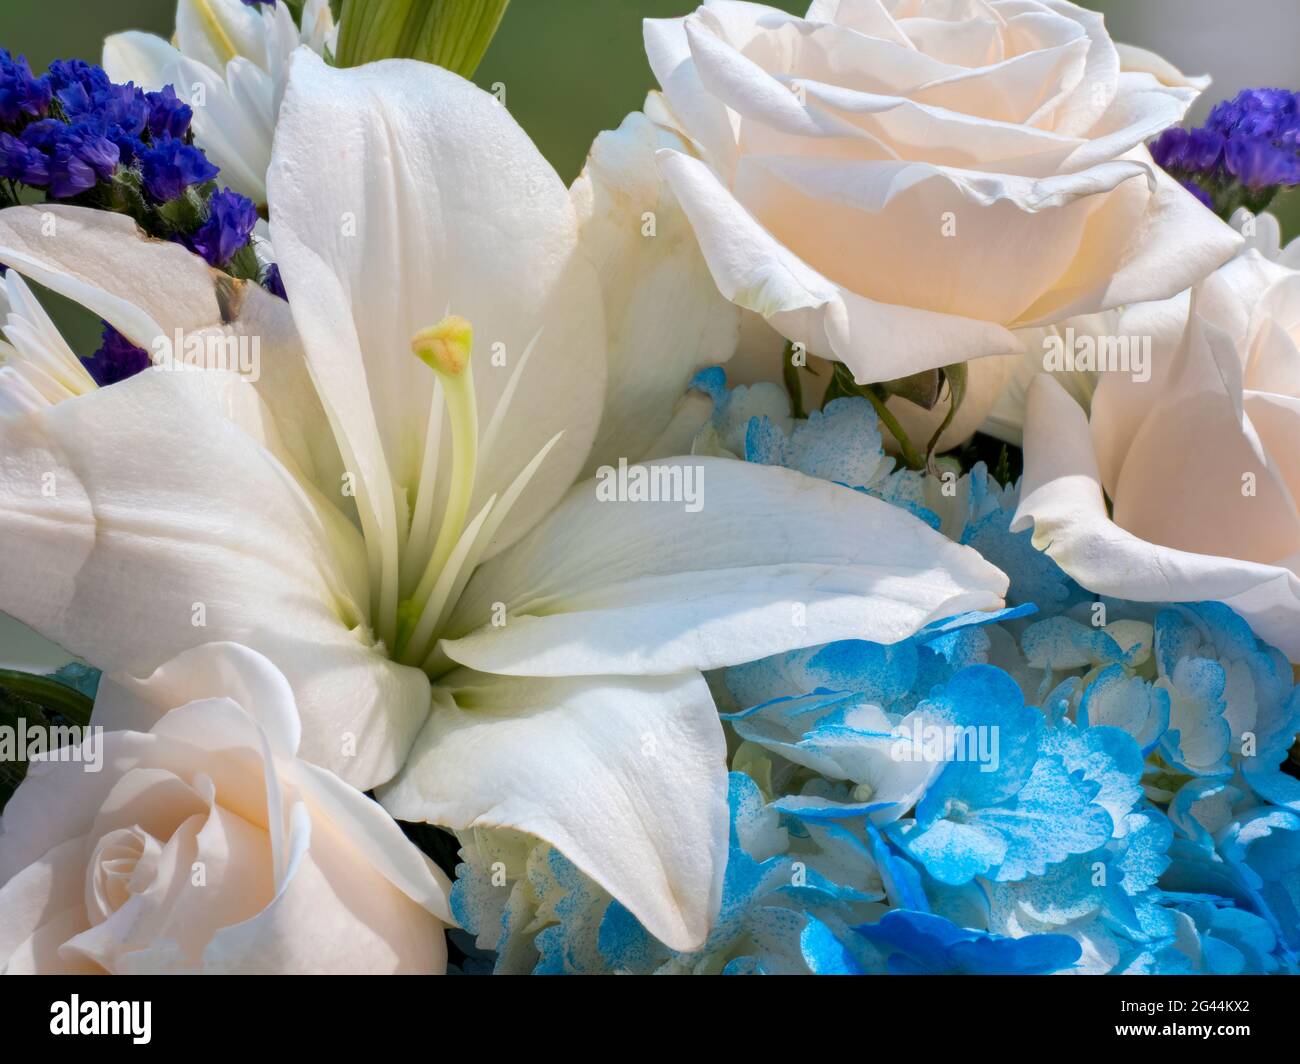 Flower arrangement of white lilies and roses Stock Photo